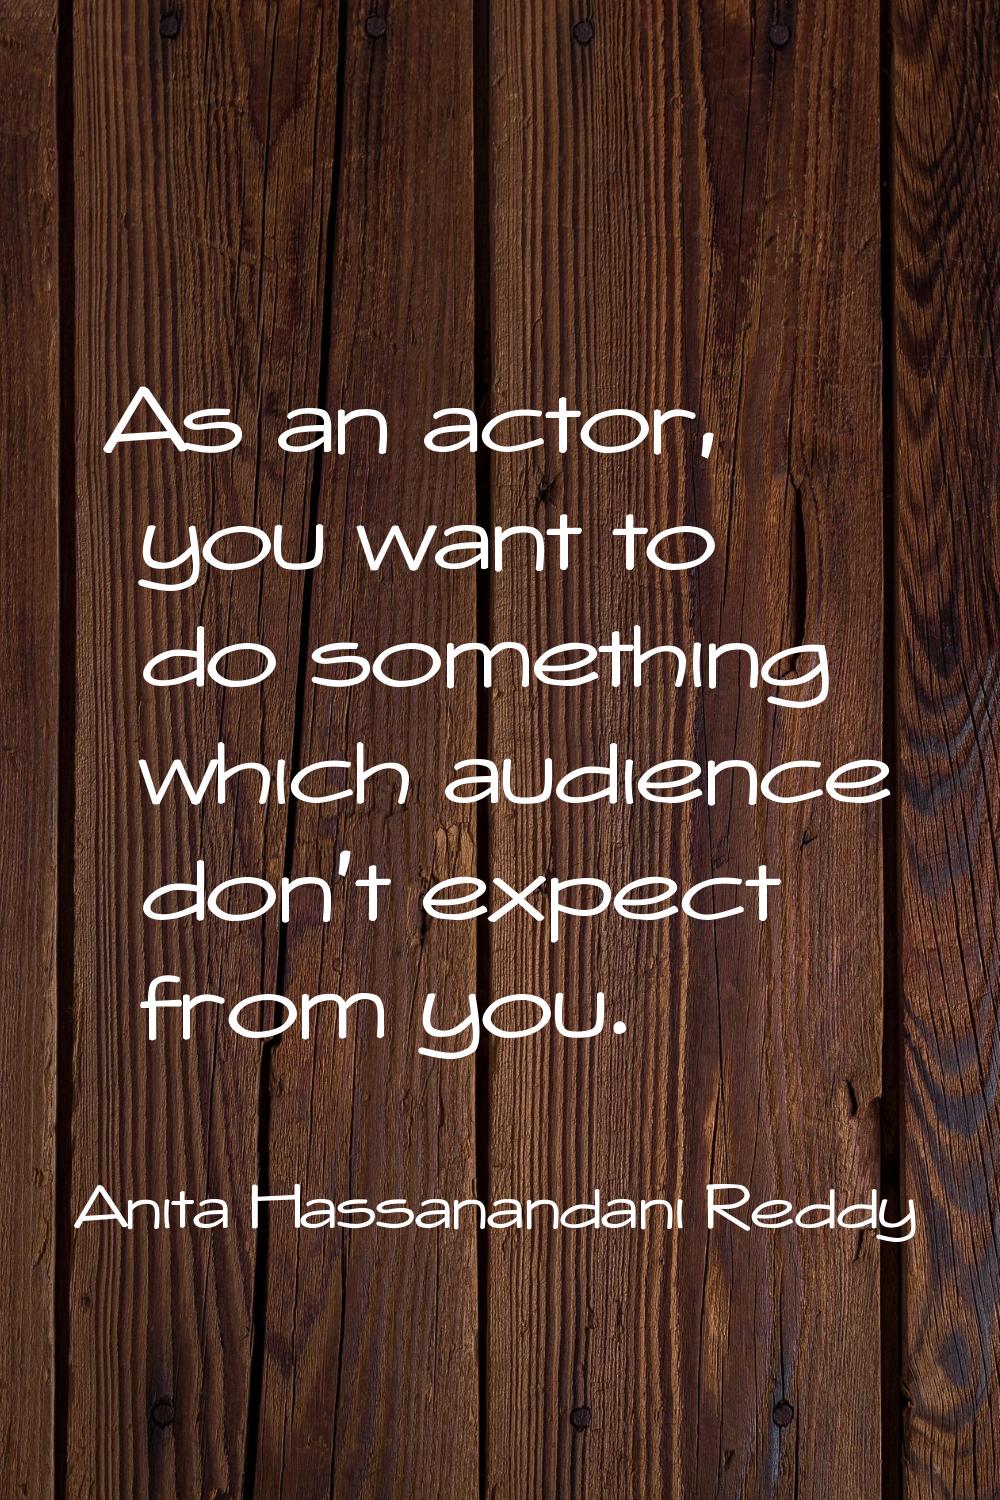 As an actor, you want to do something which audience don't expect from you.